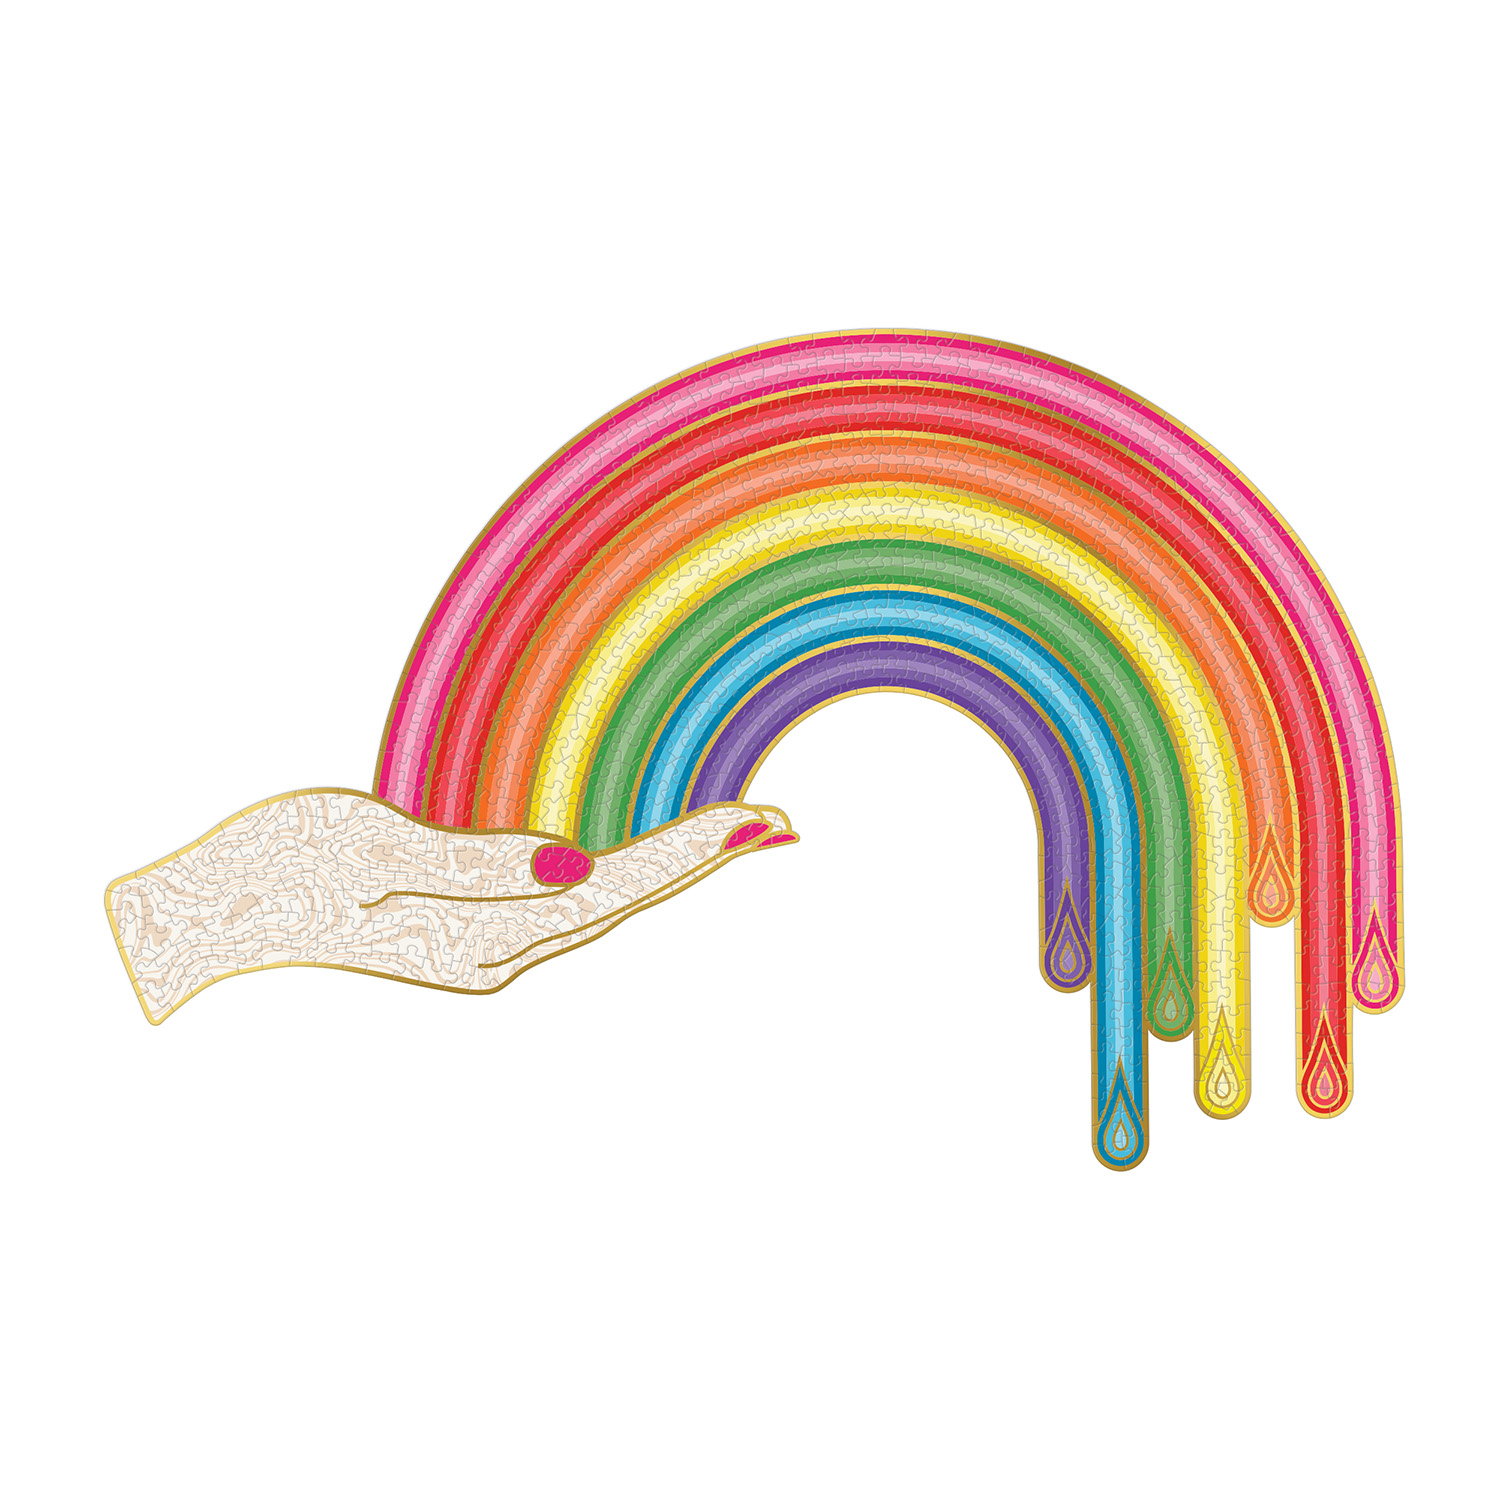 Jonathan Adler Rainbow Hand 750 Piece Shaped Puzzle (Other) - image 2 of 4